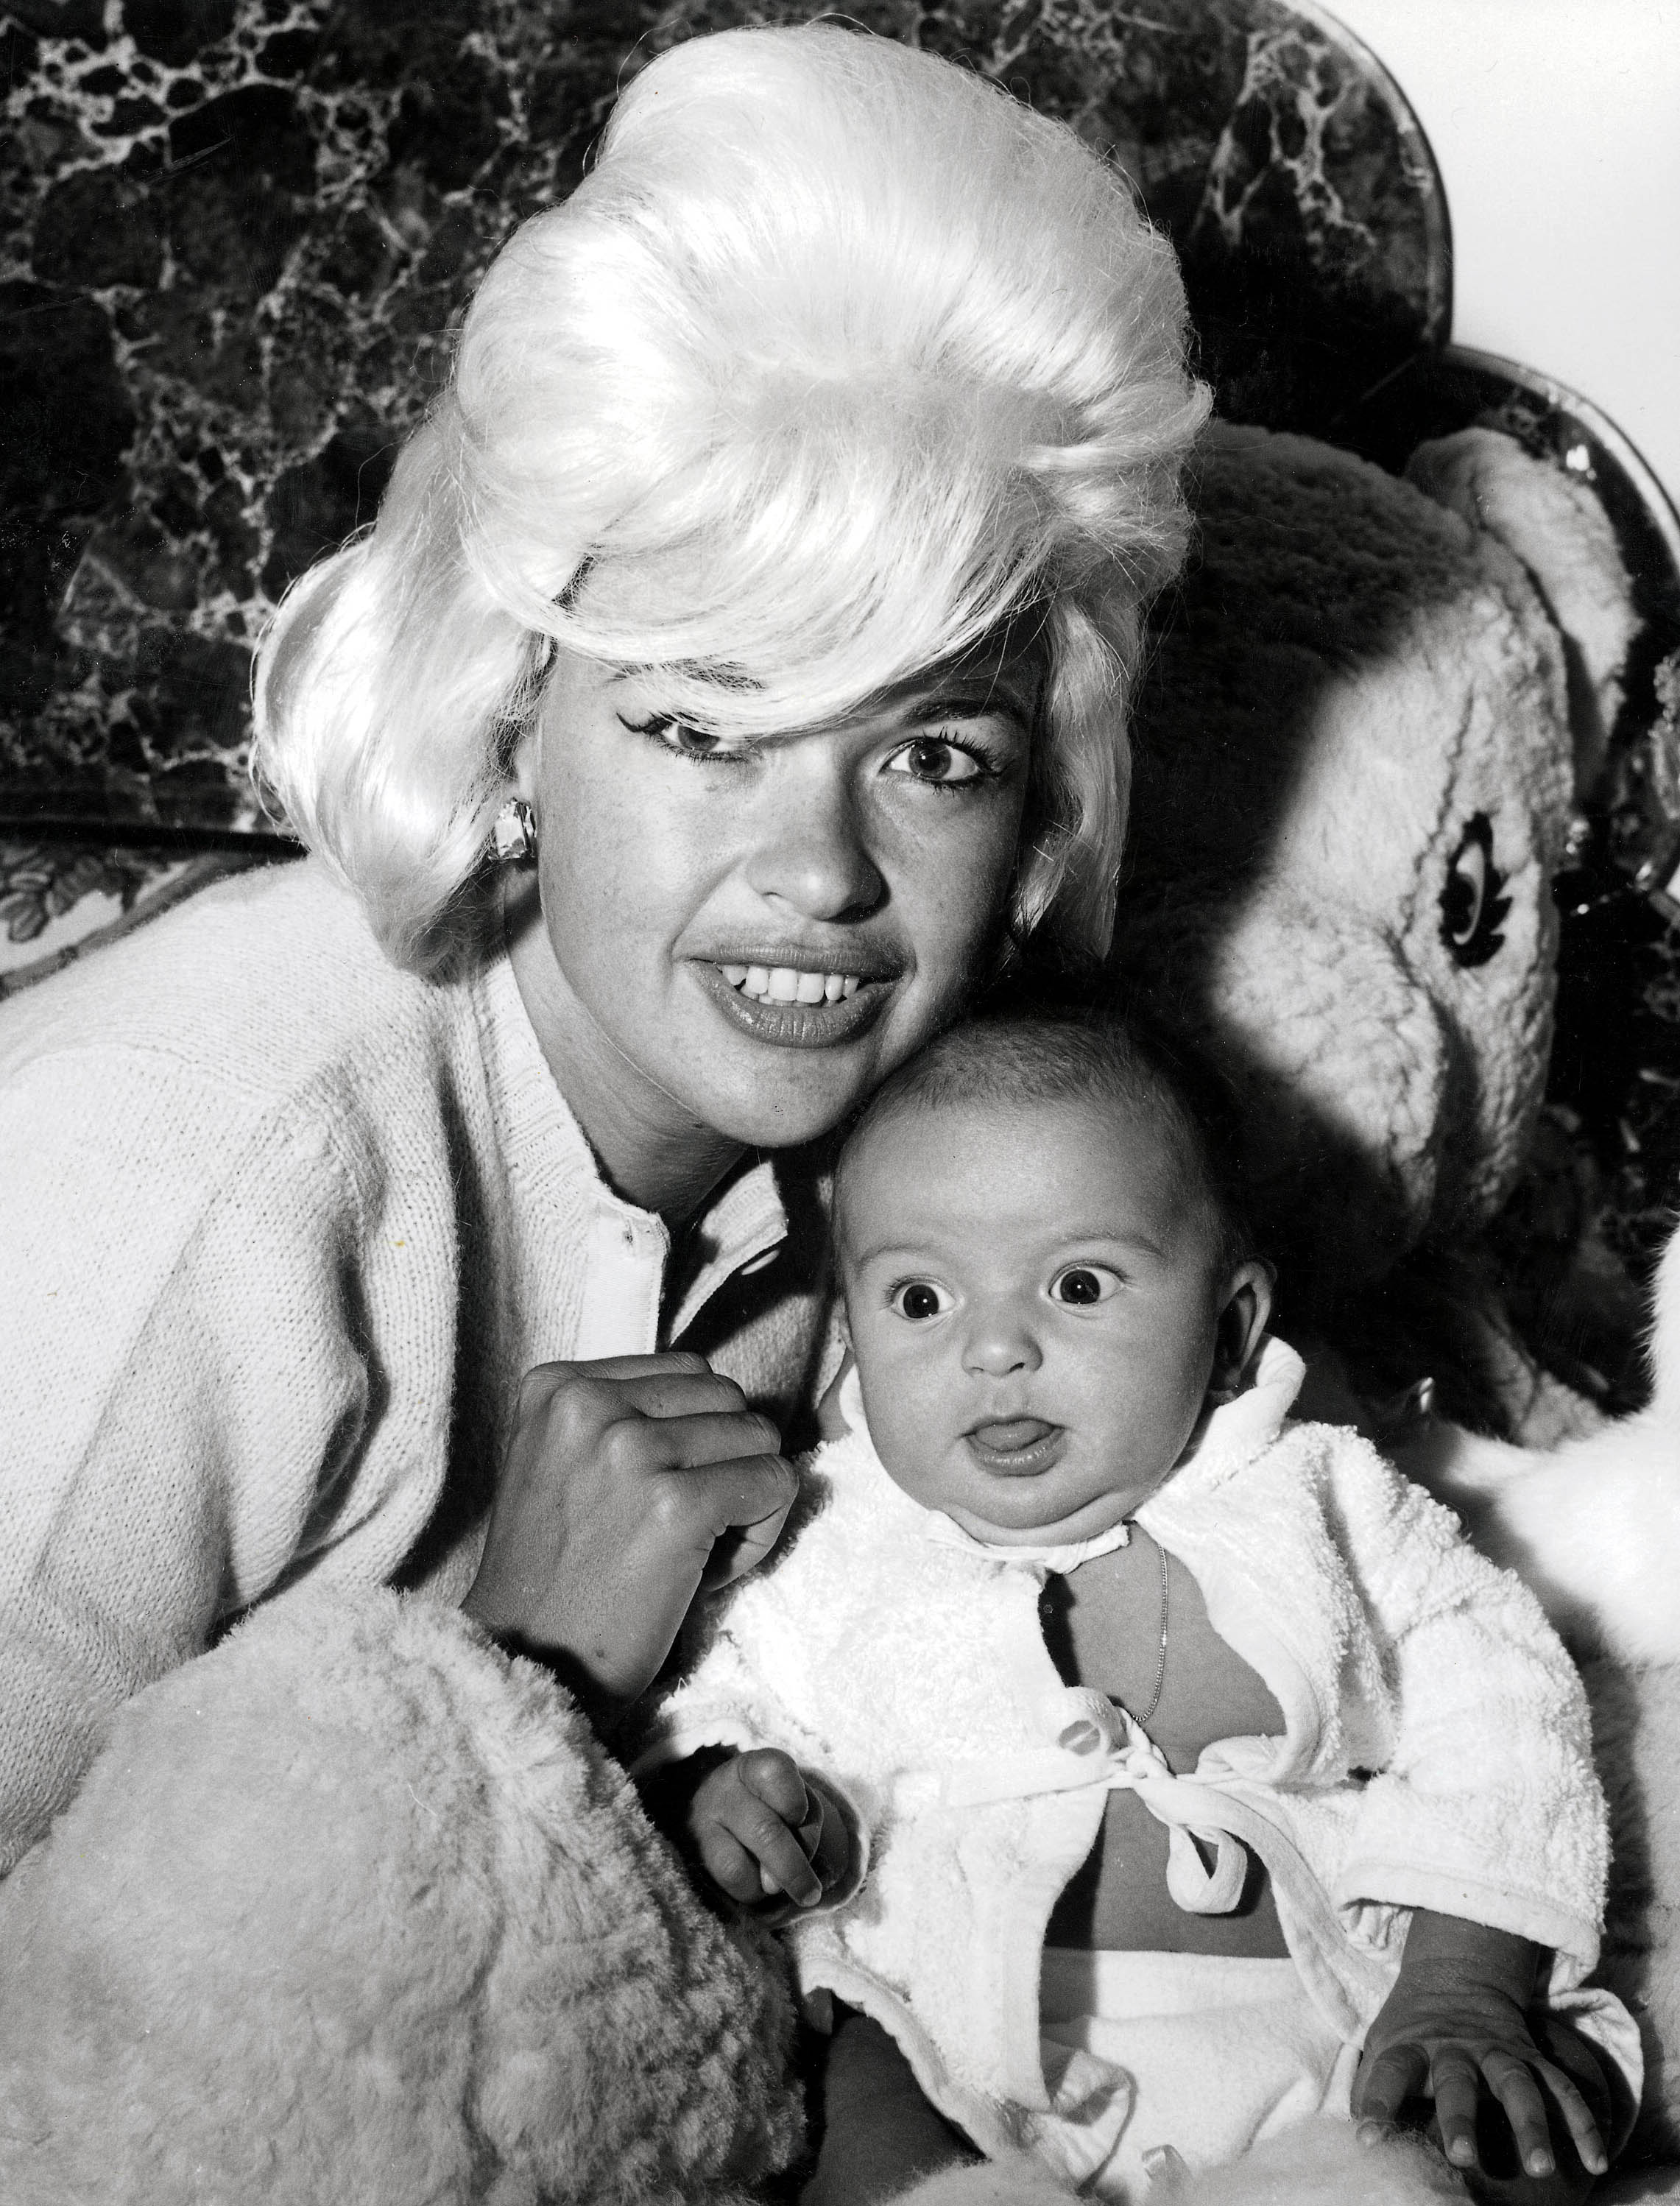 Jayne Mansfield with her baby daughter Mariska Magdolna Hargitay at their Hollywood home in 1964 | Source: Getty Images